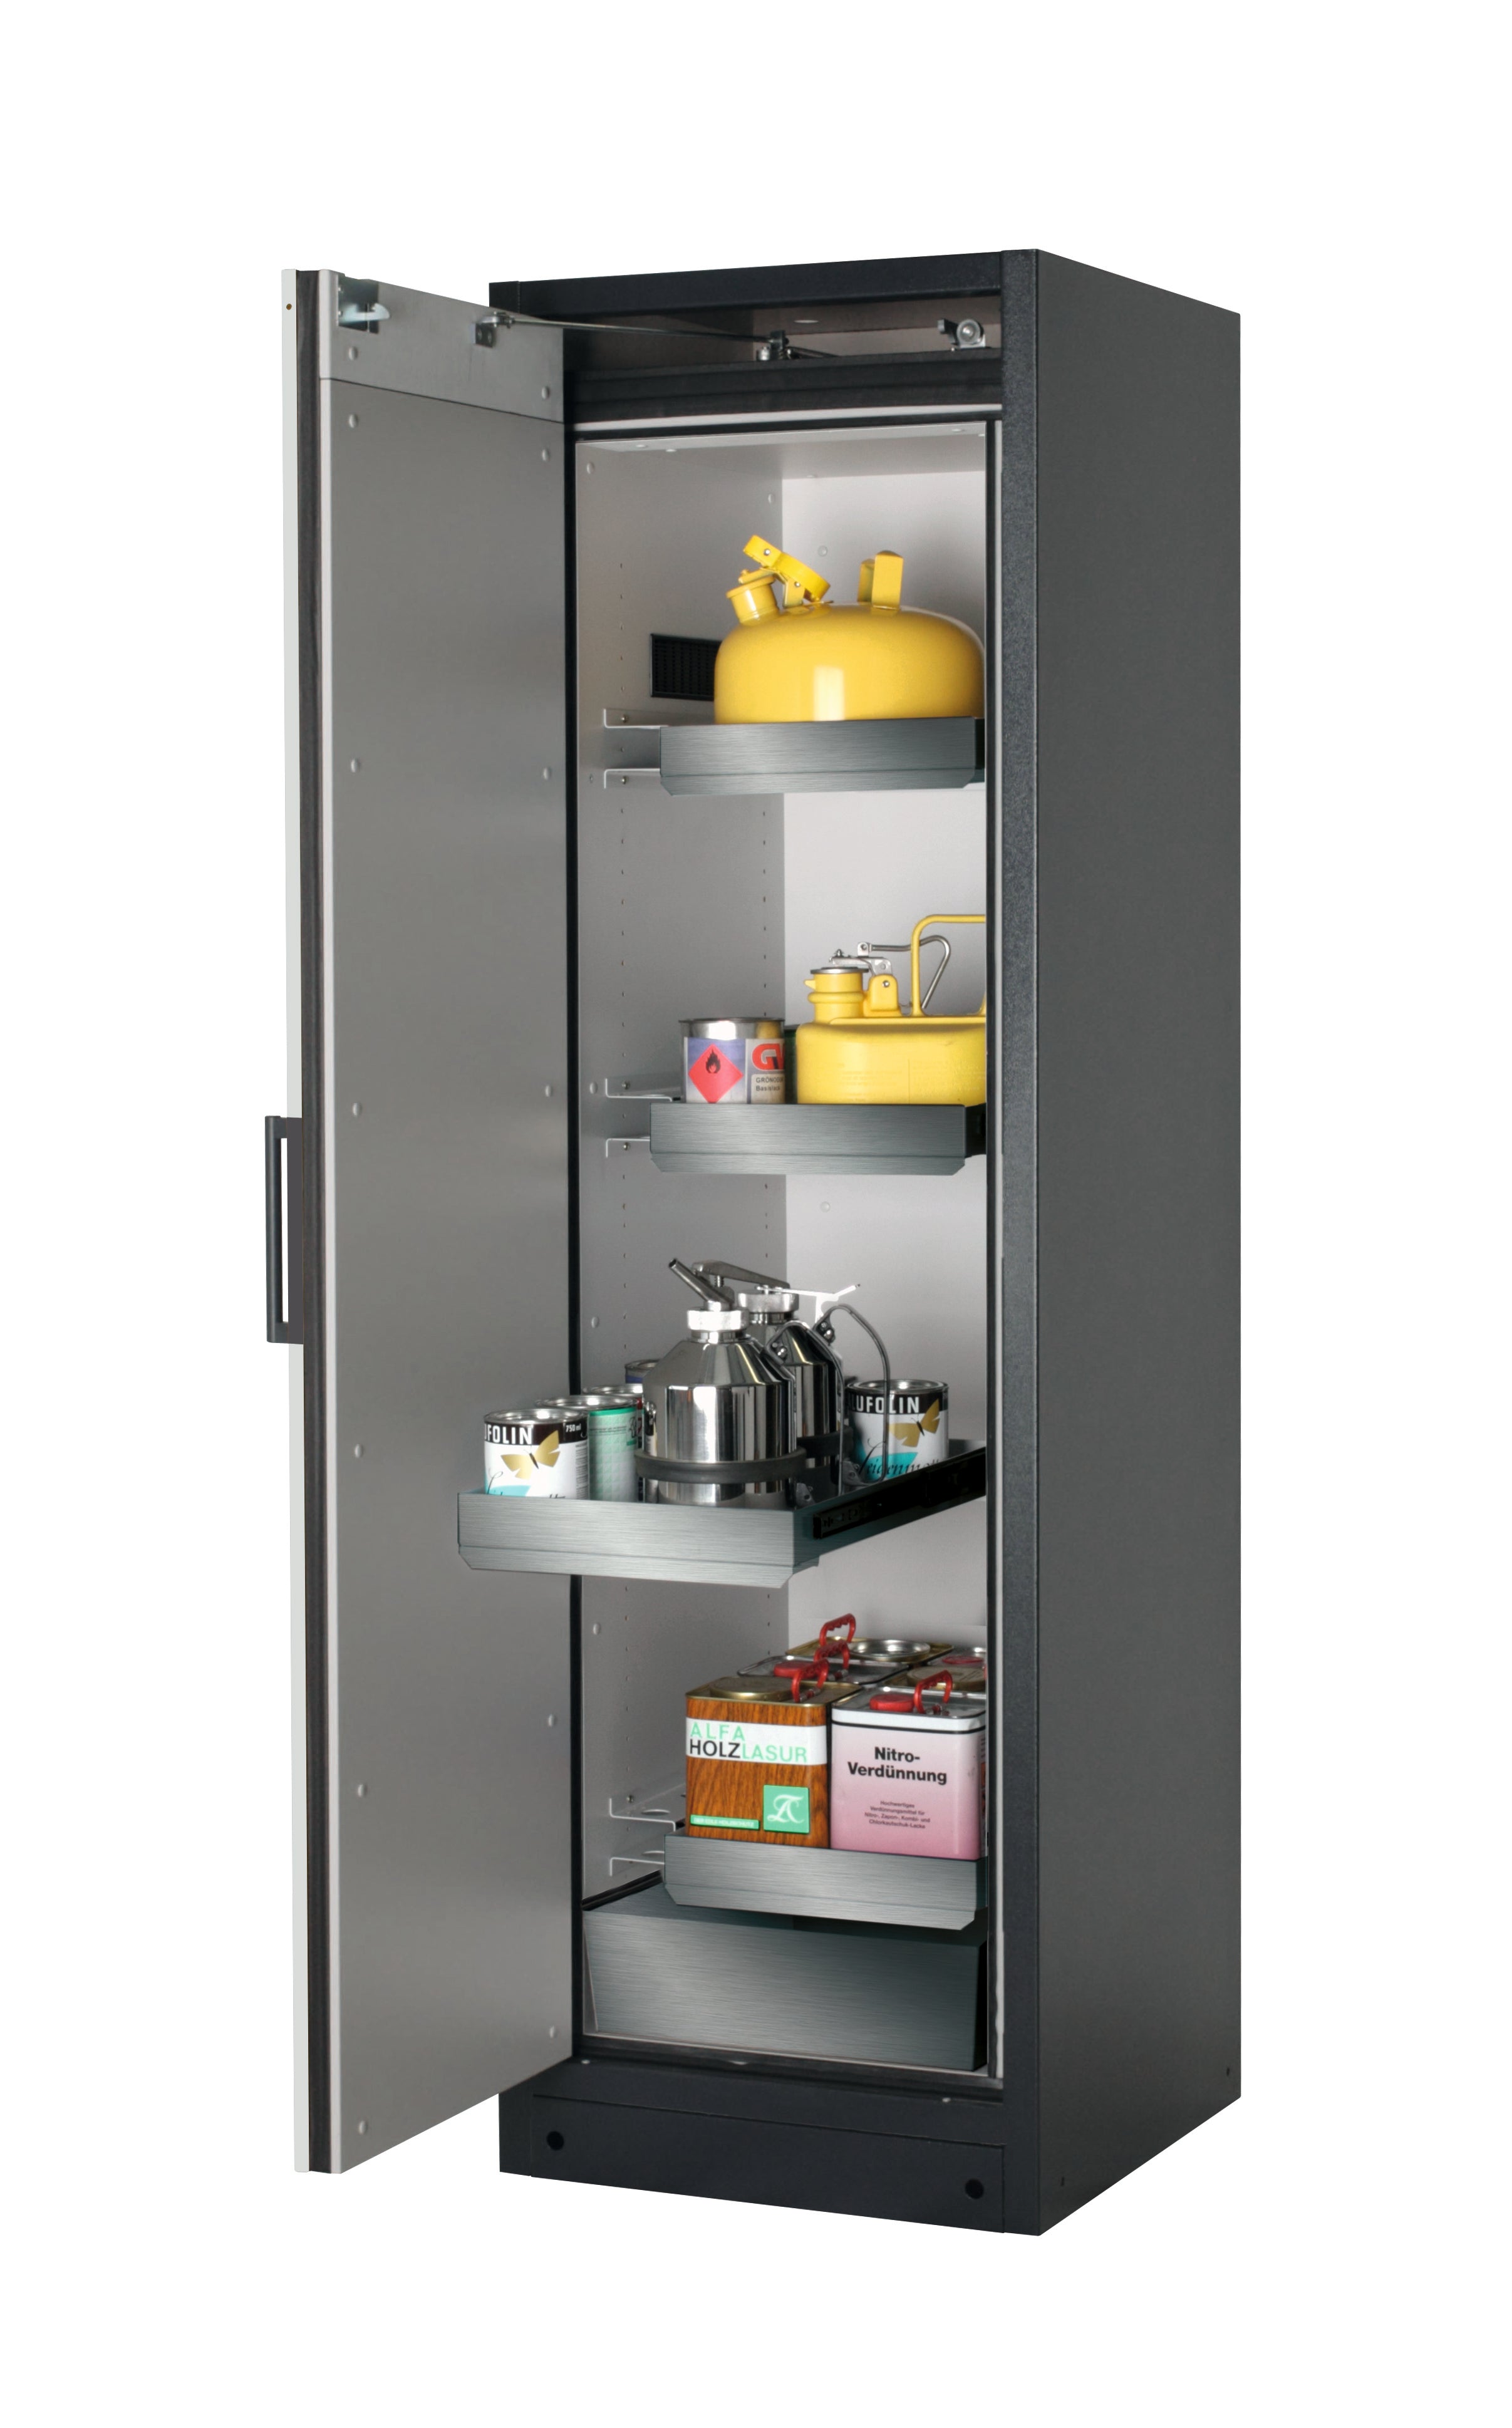 Type 90 safety storage cabinet Q-CLASSIC-90 model Q90.195.060 in light grey RAL 7035 with 3x drawer (standard) (stainless steel 1.4301),